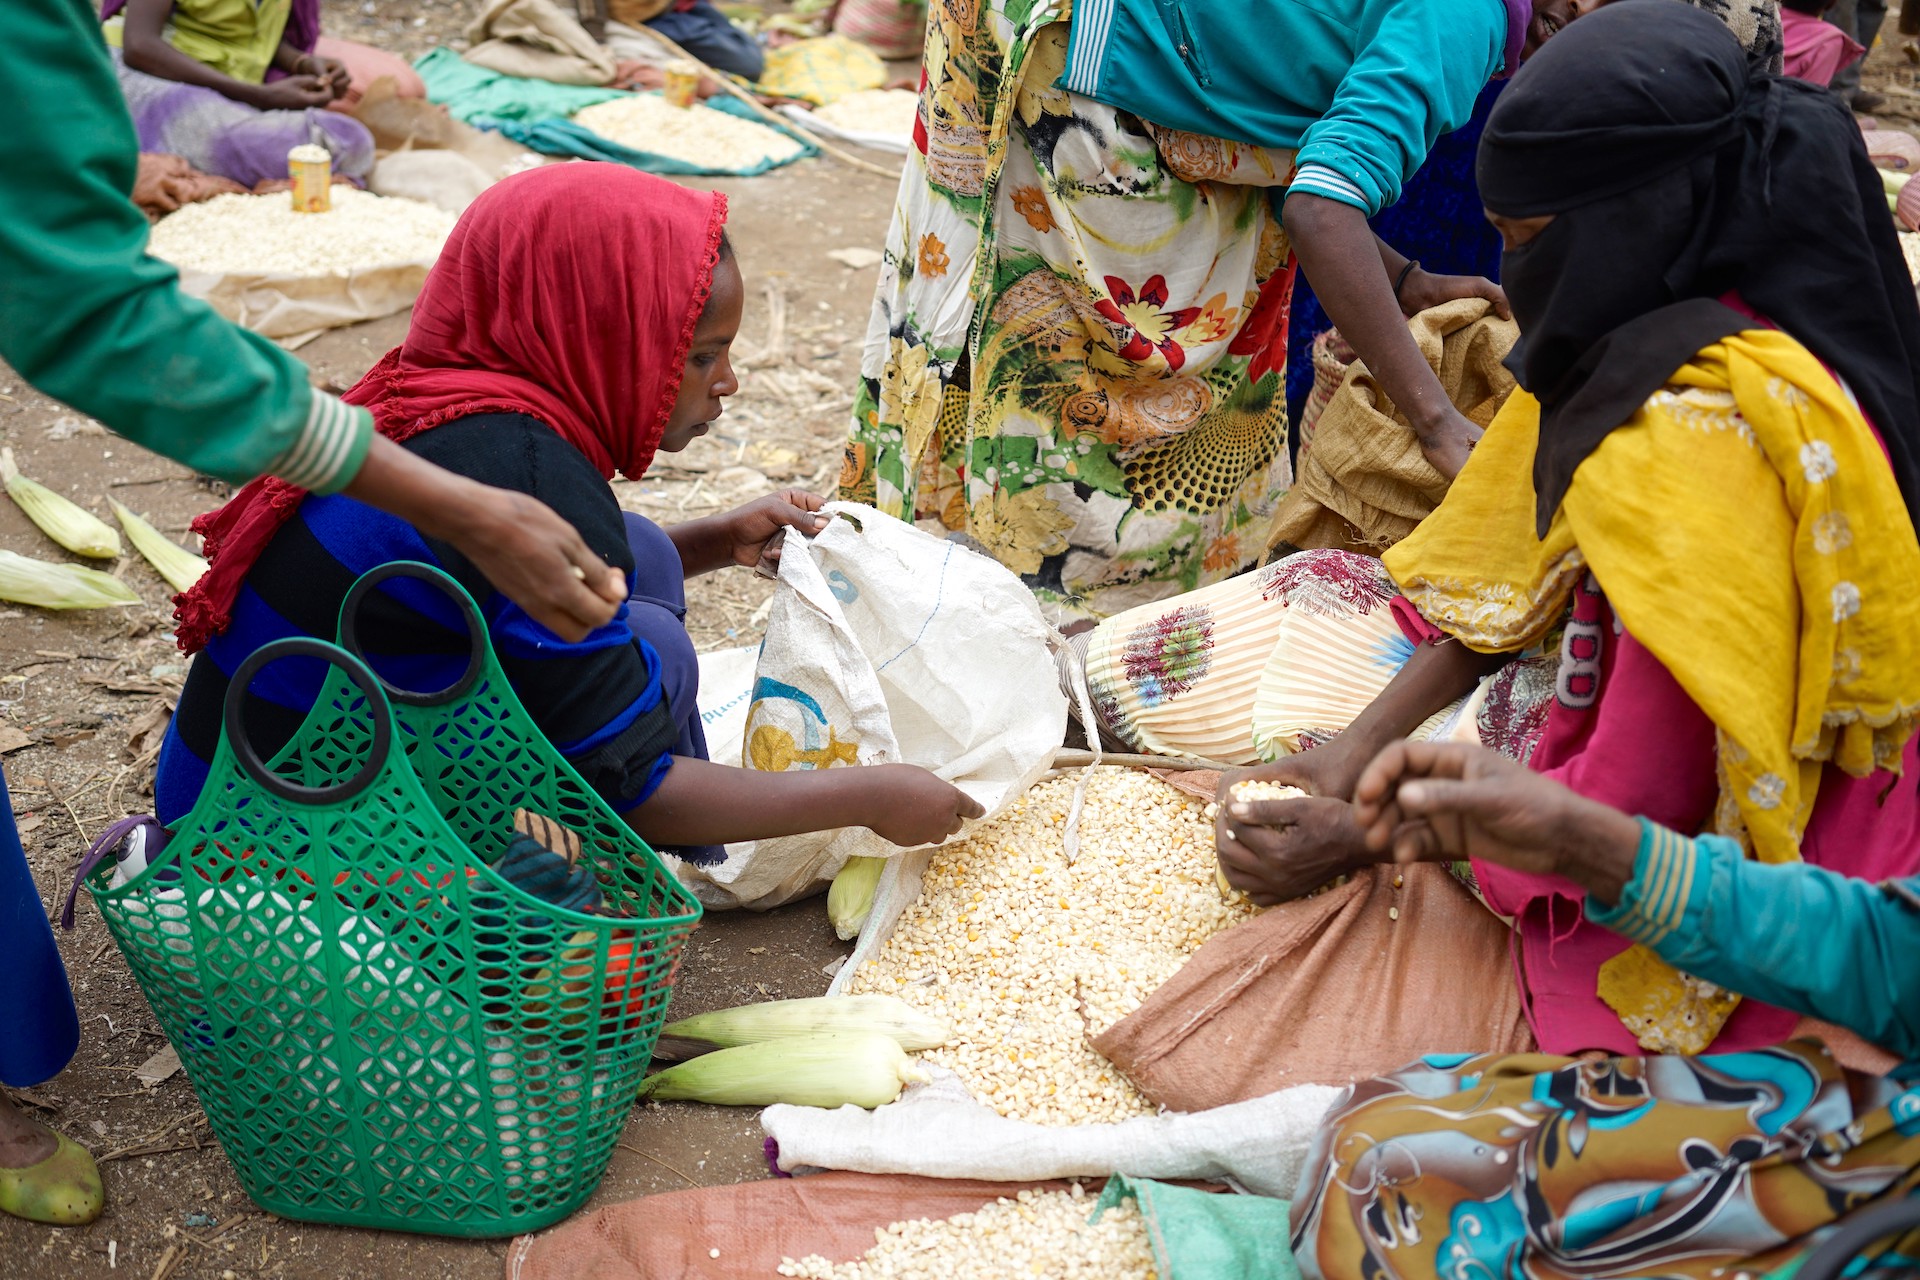 A woman sells maize at the market in Sidameika Tura, Arsi Negele, Ethiopia. (Photo: Peter Lowe/CIMMYT)